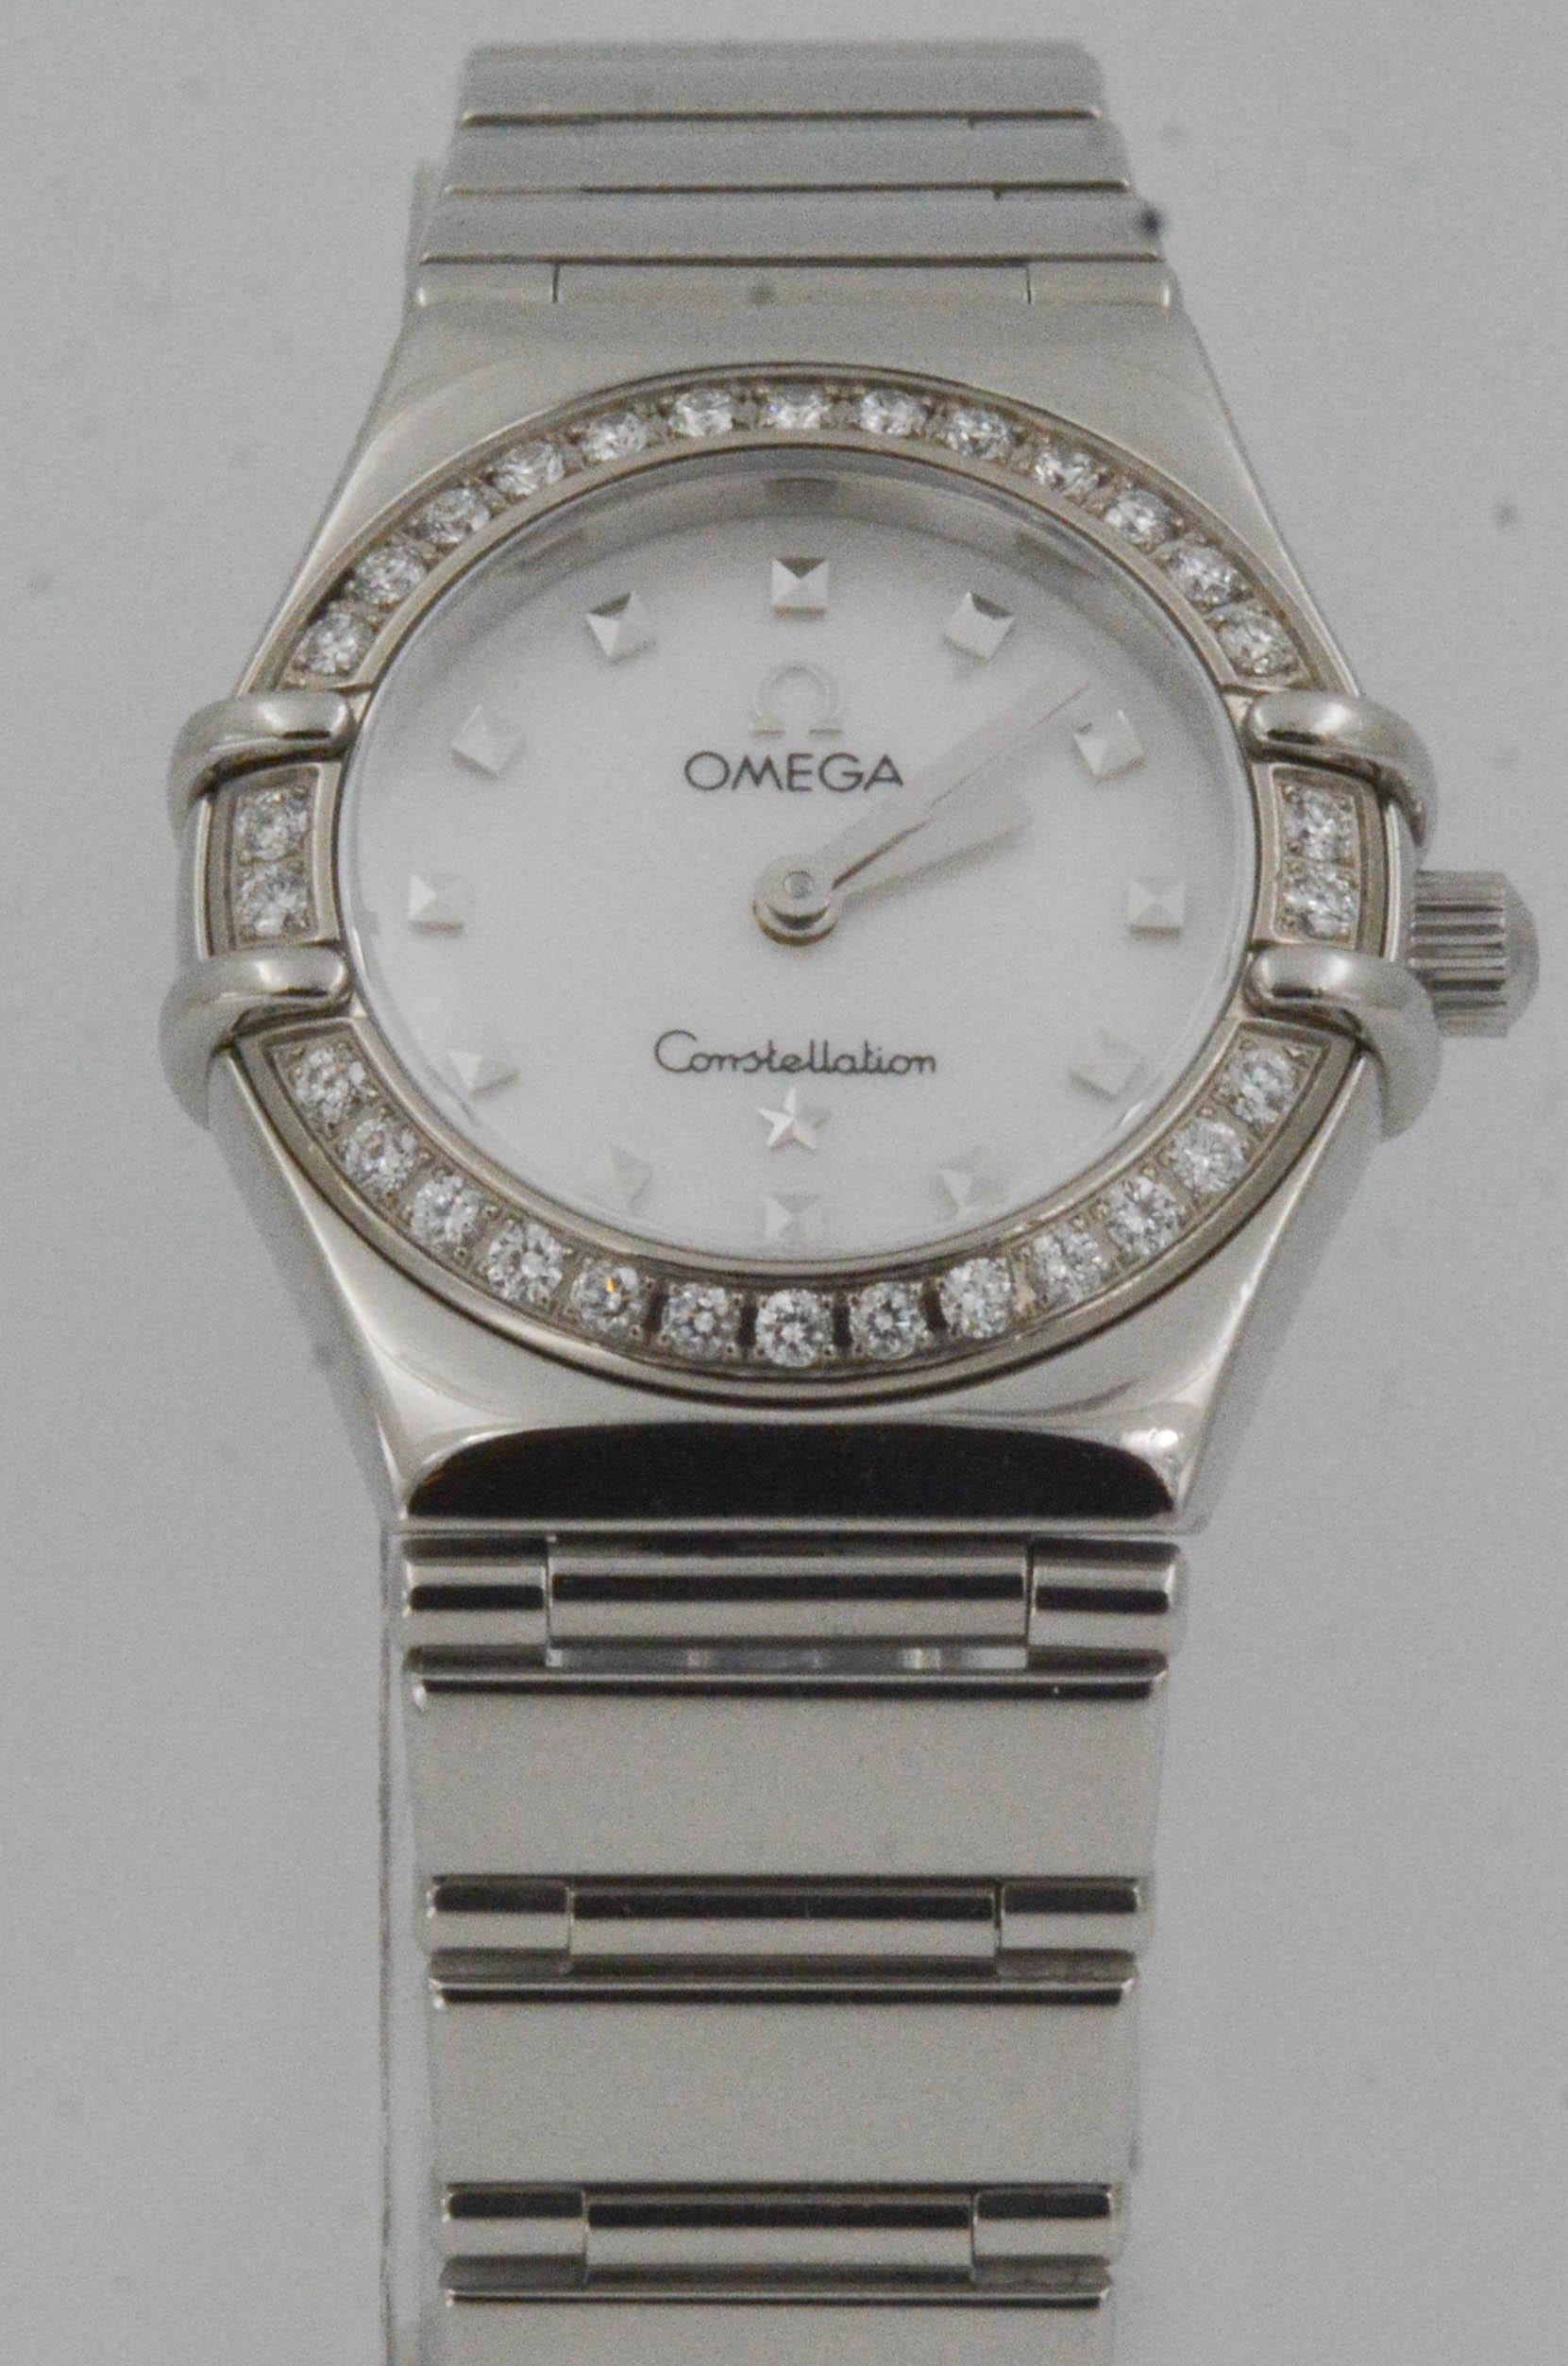 • Model: OMEGA Constellation  
• Movement: Quartz
• Case Size: 22mm 
• Case Material: Stainless steel
• Dial: White mother of pearl with diamond bezel
• Strap: Stainless steel bracelet
• Closure/Clasp Type: Deployment clasp
• CIRCA 2008; box only
•